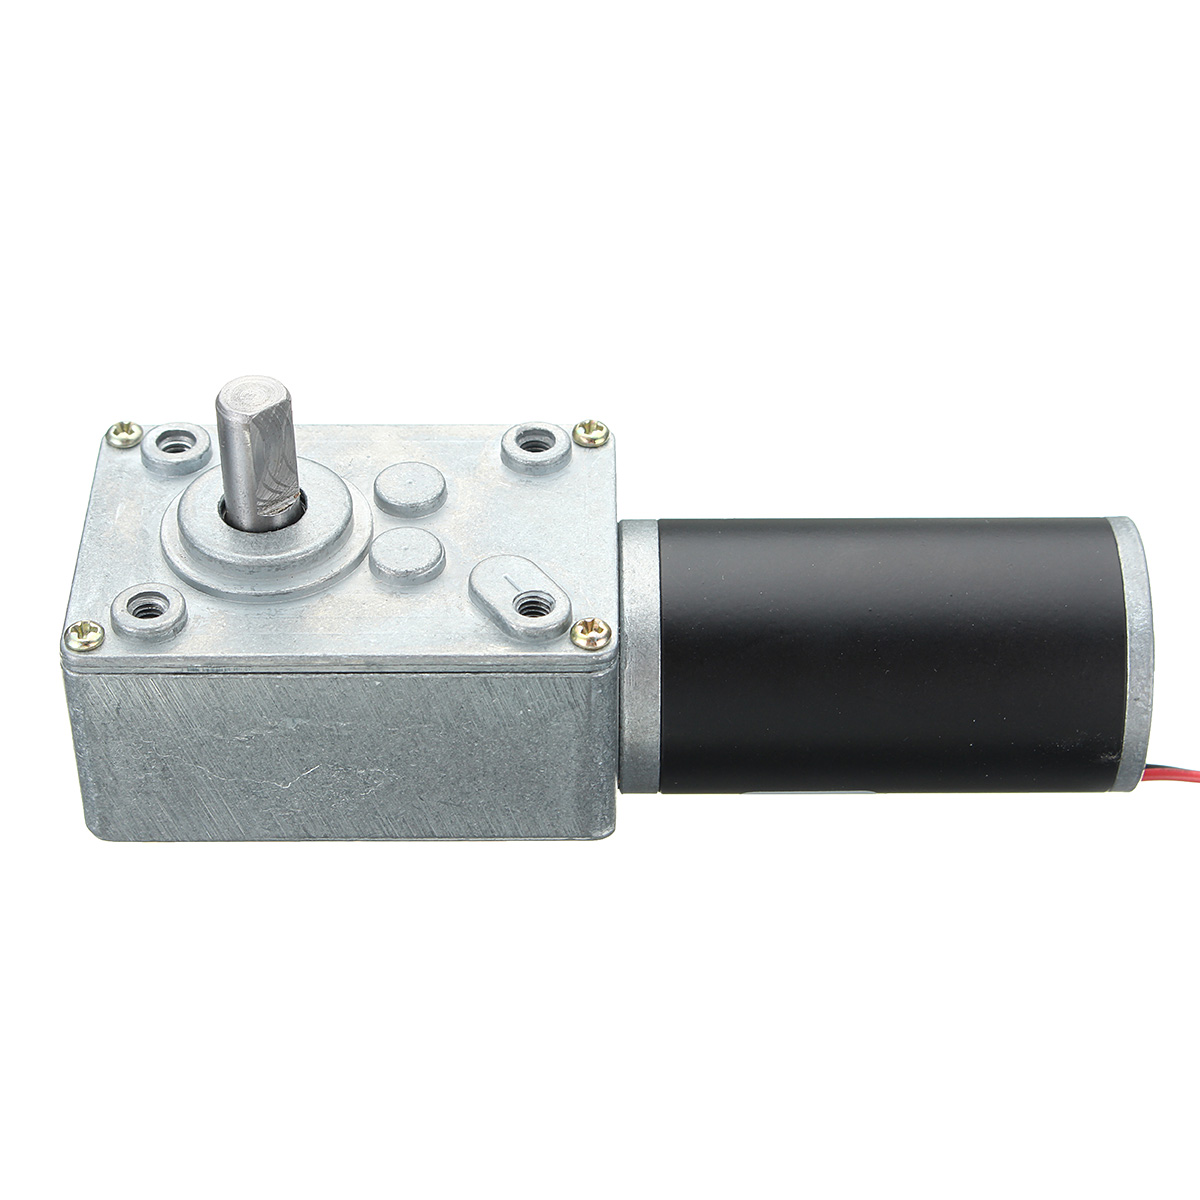 12V-DC-Motor-High-Torque-Electric-Power-Turbo-Reversible-Reducer-Worm-Geared-1193711-4